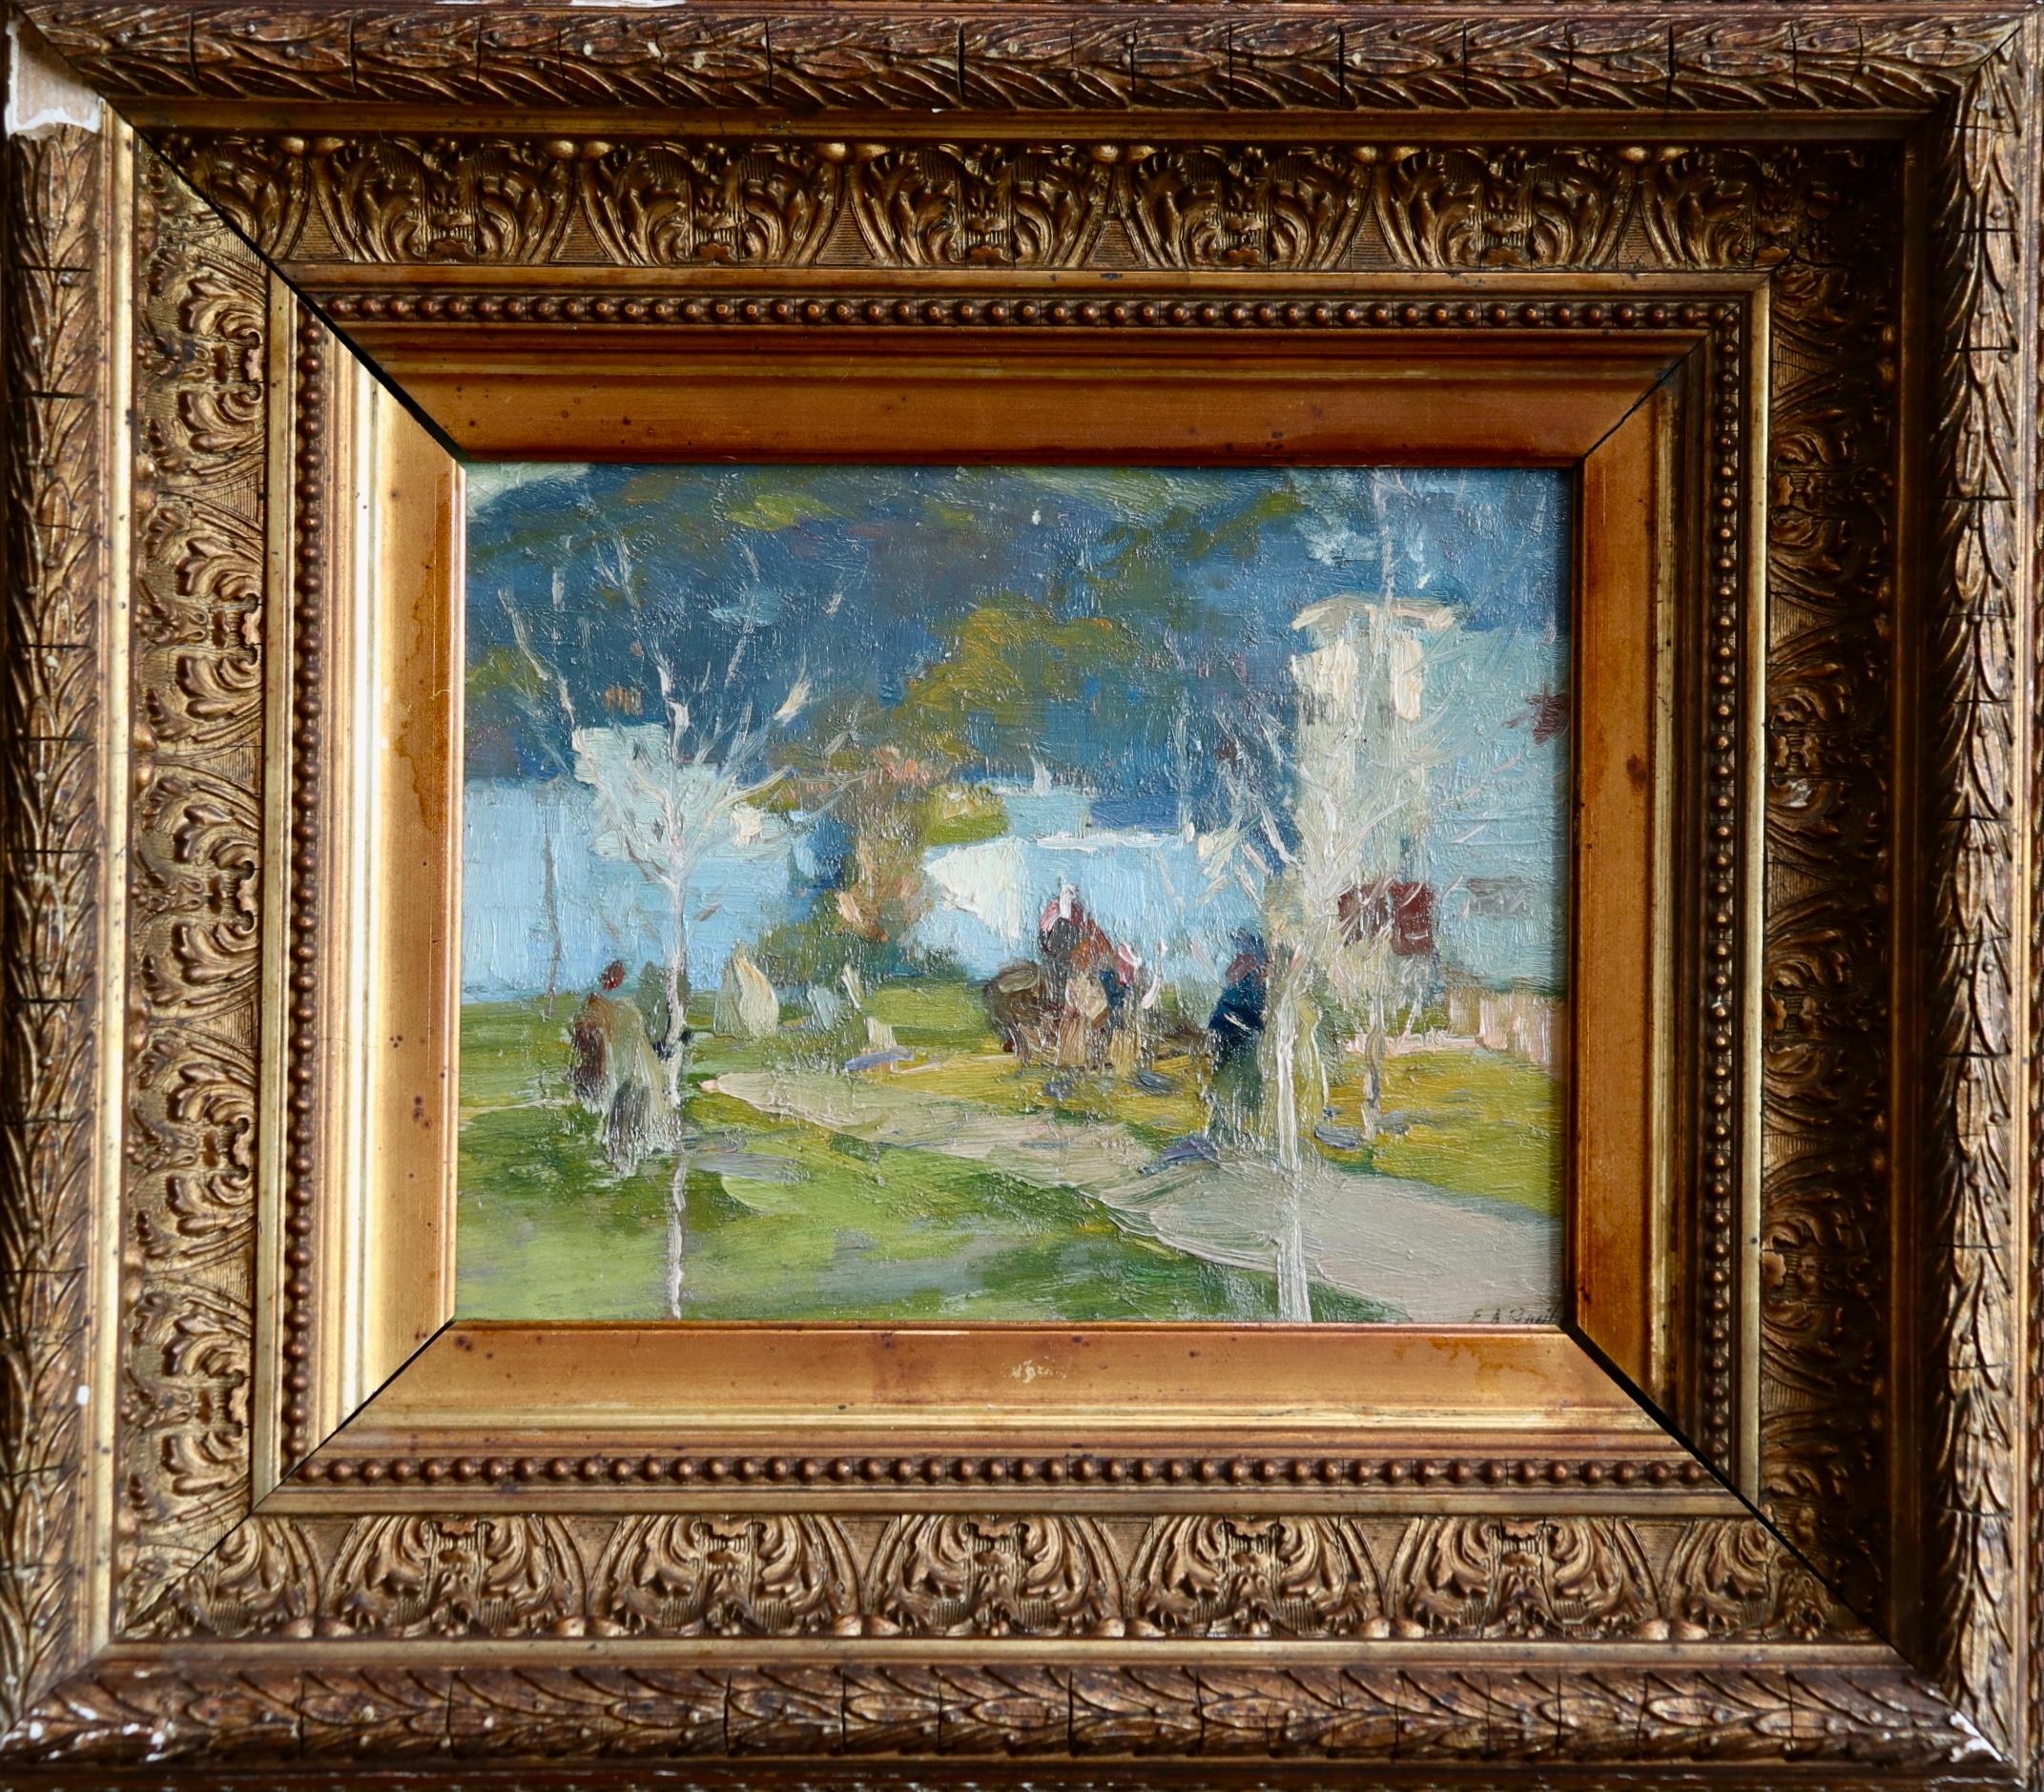 Signed and titled landscape oil on panel circa 1940 by Elie Anatole Pavil the Russian impressionist painter. The work depicts a view of Ouezzane, a town in northern Morocco. 

Signature:
Signed lower right and titled verso

Dimensions:
Framed: